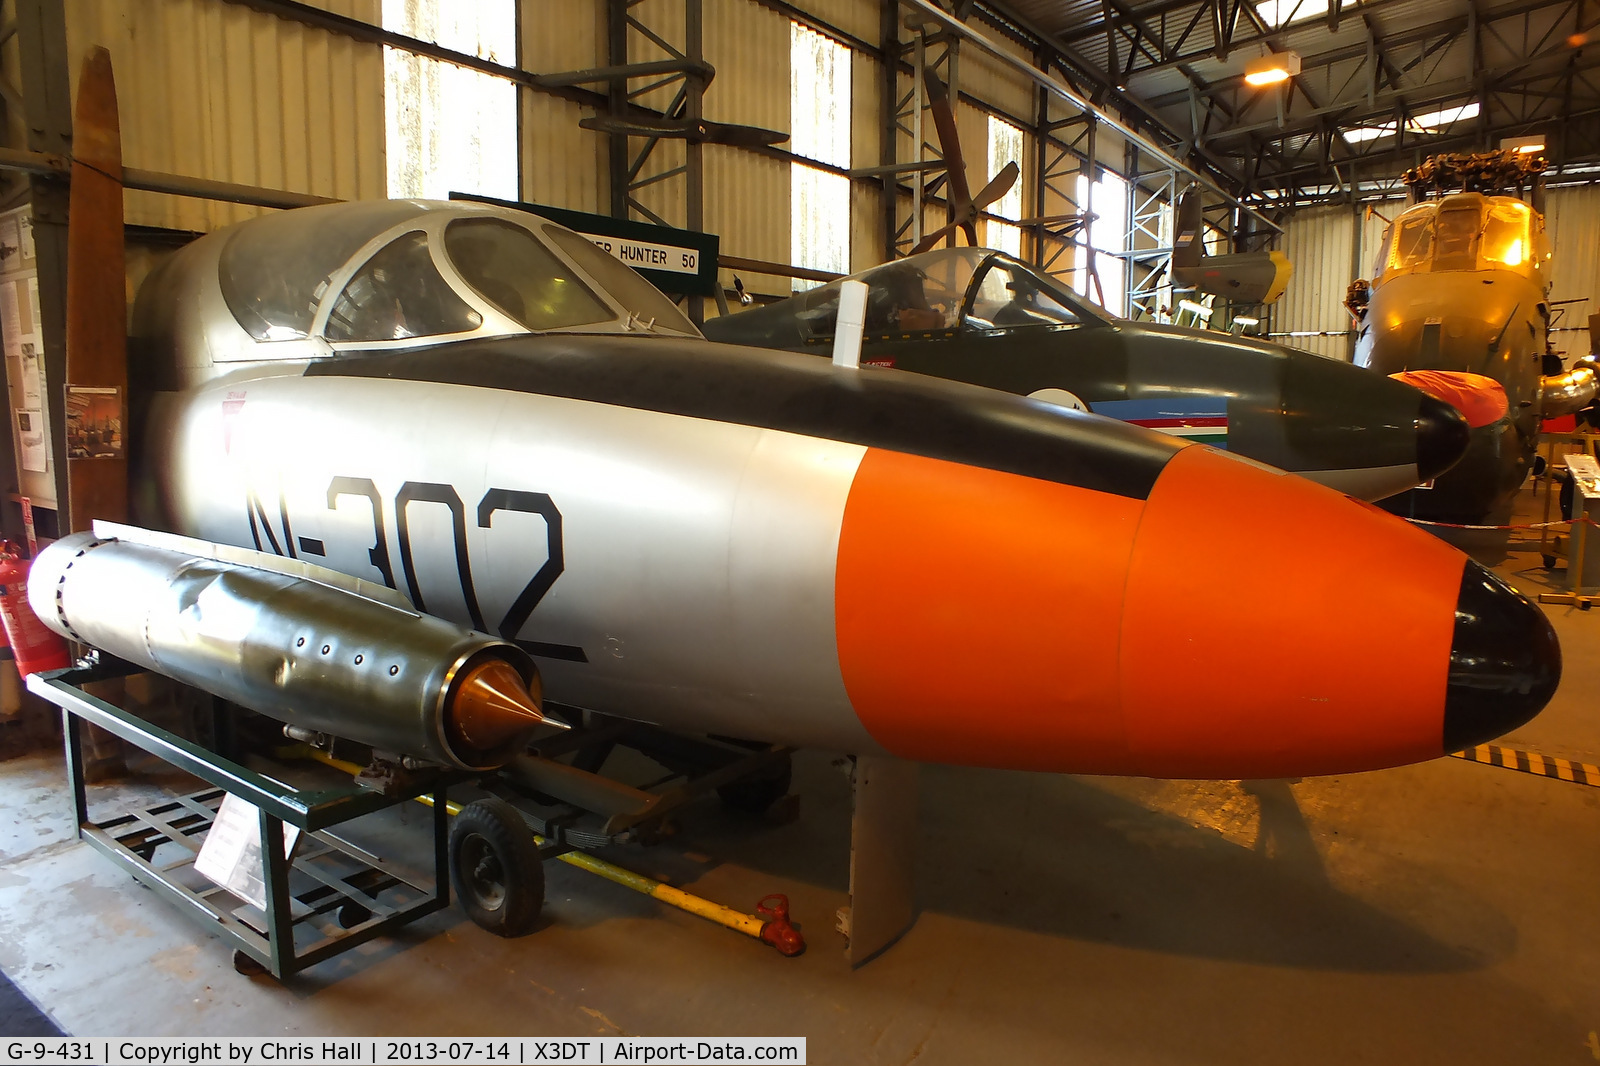 G-9-431, 1958 Hawker Hunter T.7 C/N HABL003318, painted in its original Royal Netherlands Air Force scheme and wearing the code N-302, preserved at the South Yorkshire Aircraft Museum, AeroVenture, Doncaster